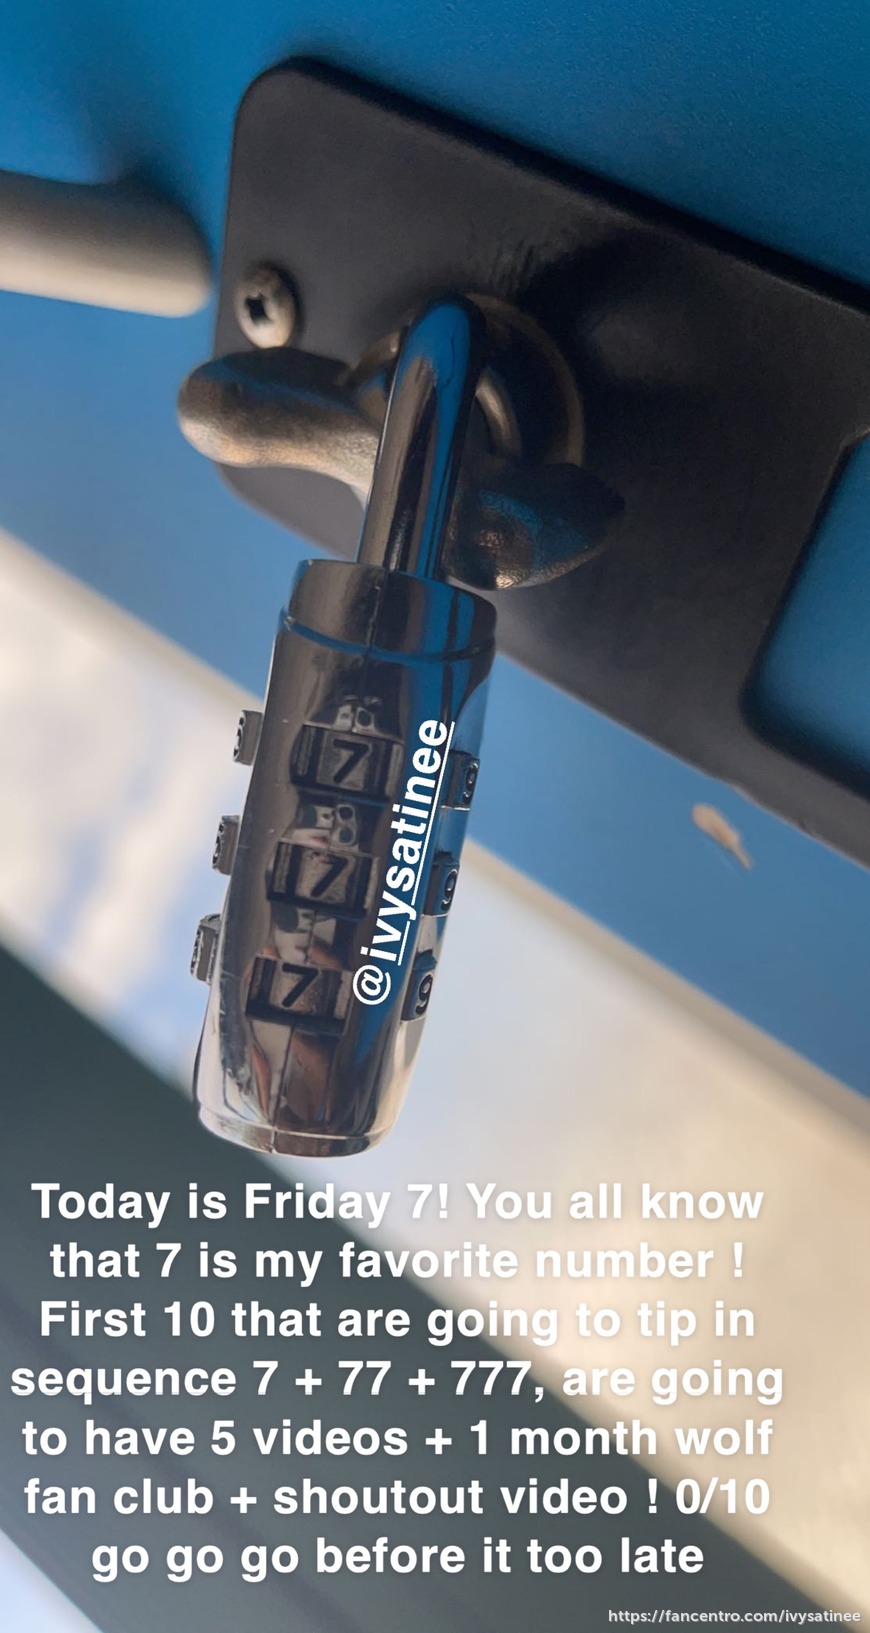 Today is Friday 7! 1